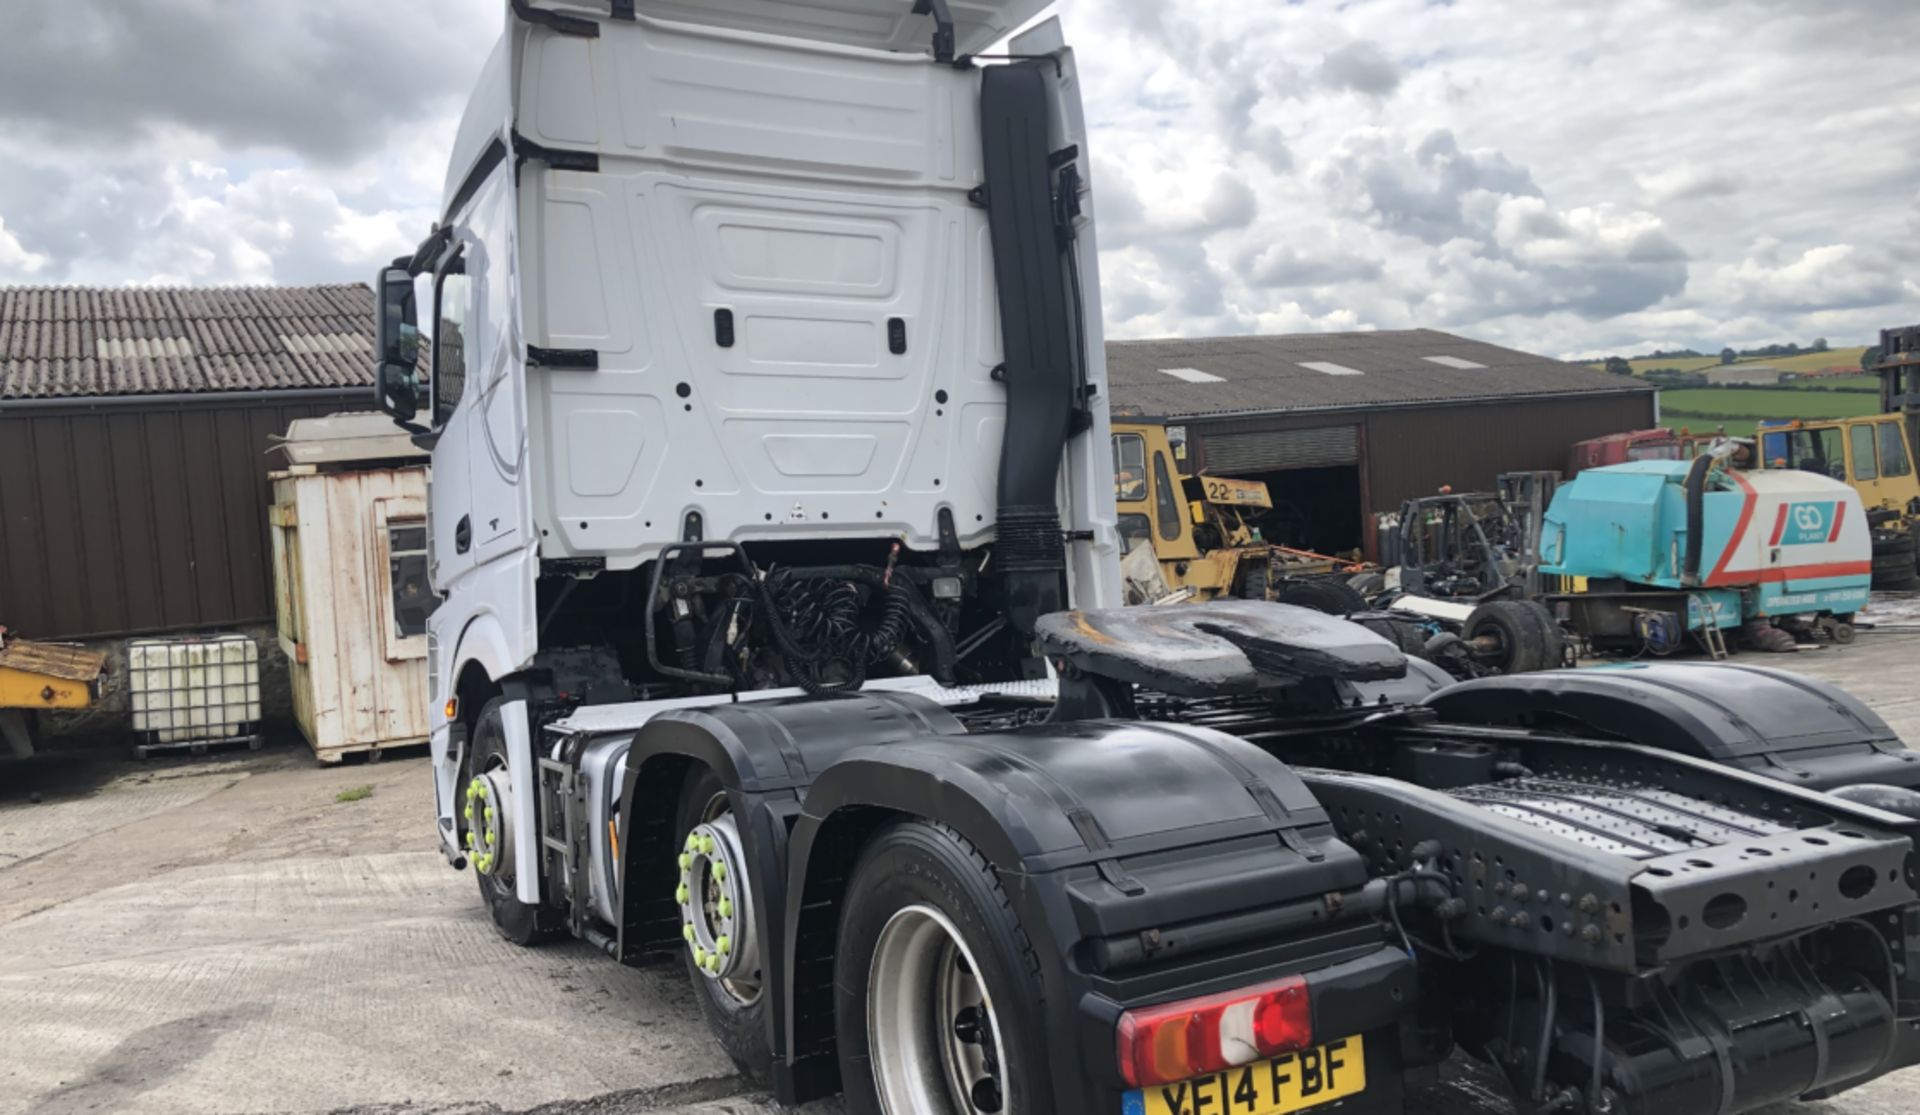 MERCEDES ACTROS 2545 3 AXLE TRACTOR UNIT - Image 9 of 12